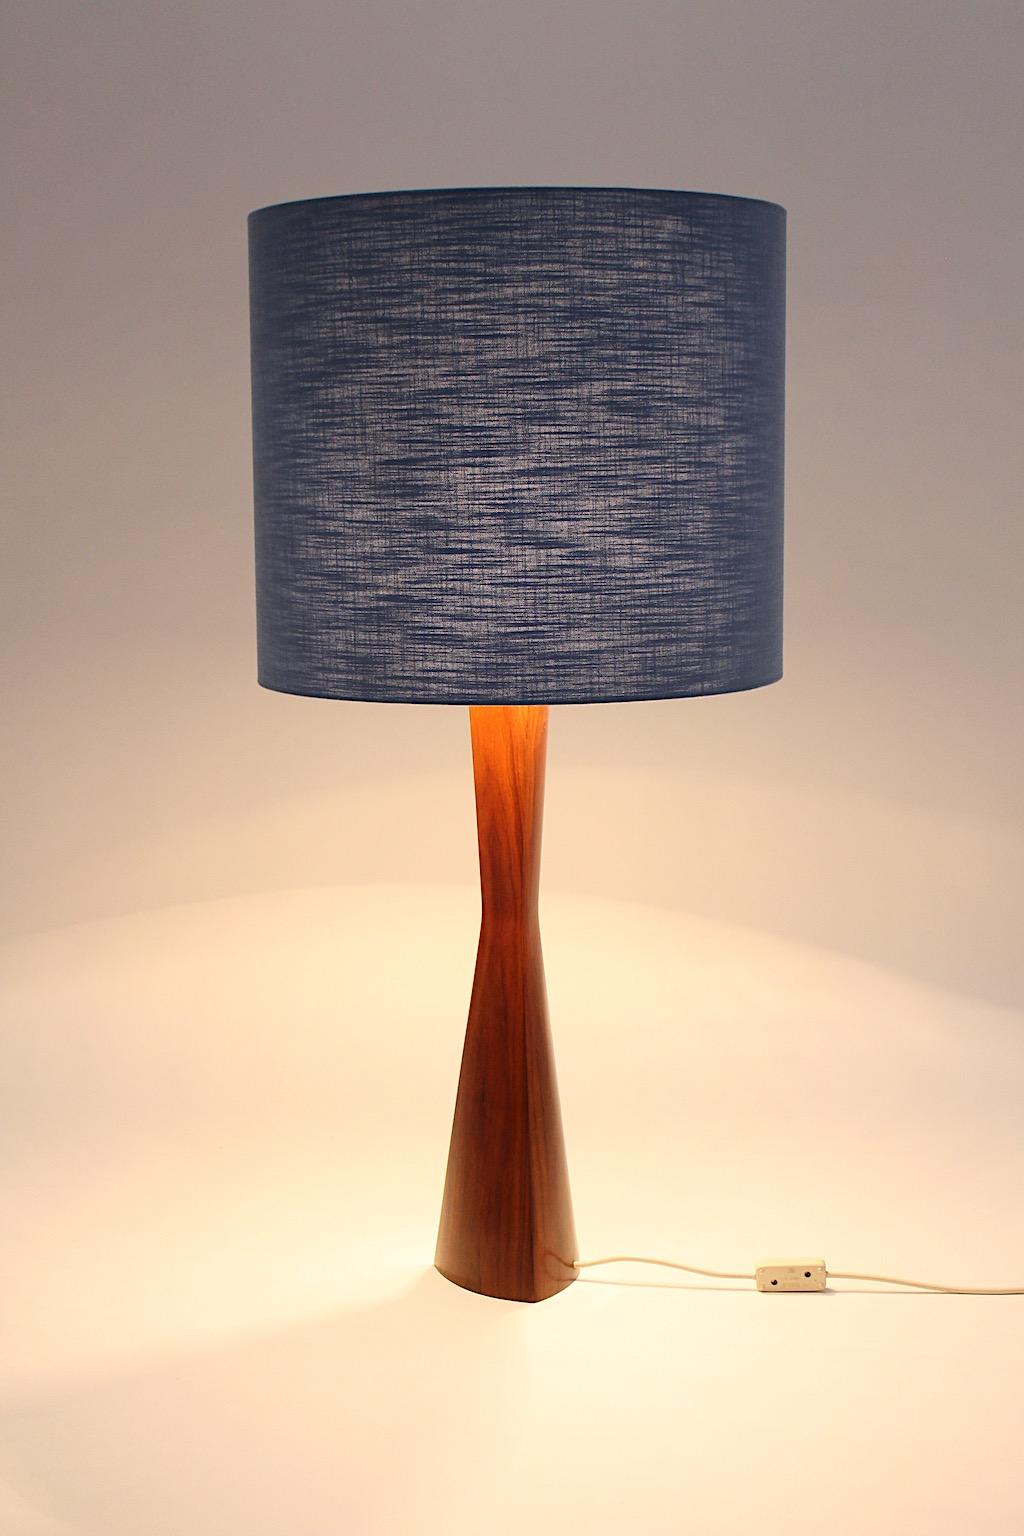 Scandinavian Modern vintage table lamp from teak with a renewed sky - blue textile fabric lamp shade.
The sculptural shape of the base from teak demonstrates beautiful warmth and luster.
The renewed lamp shade is covered with sky - blue textile